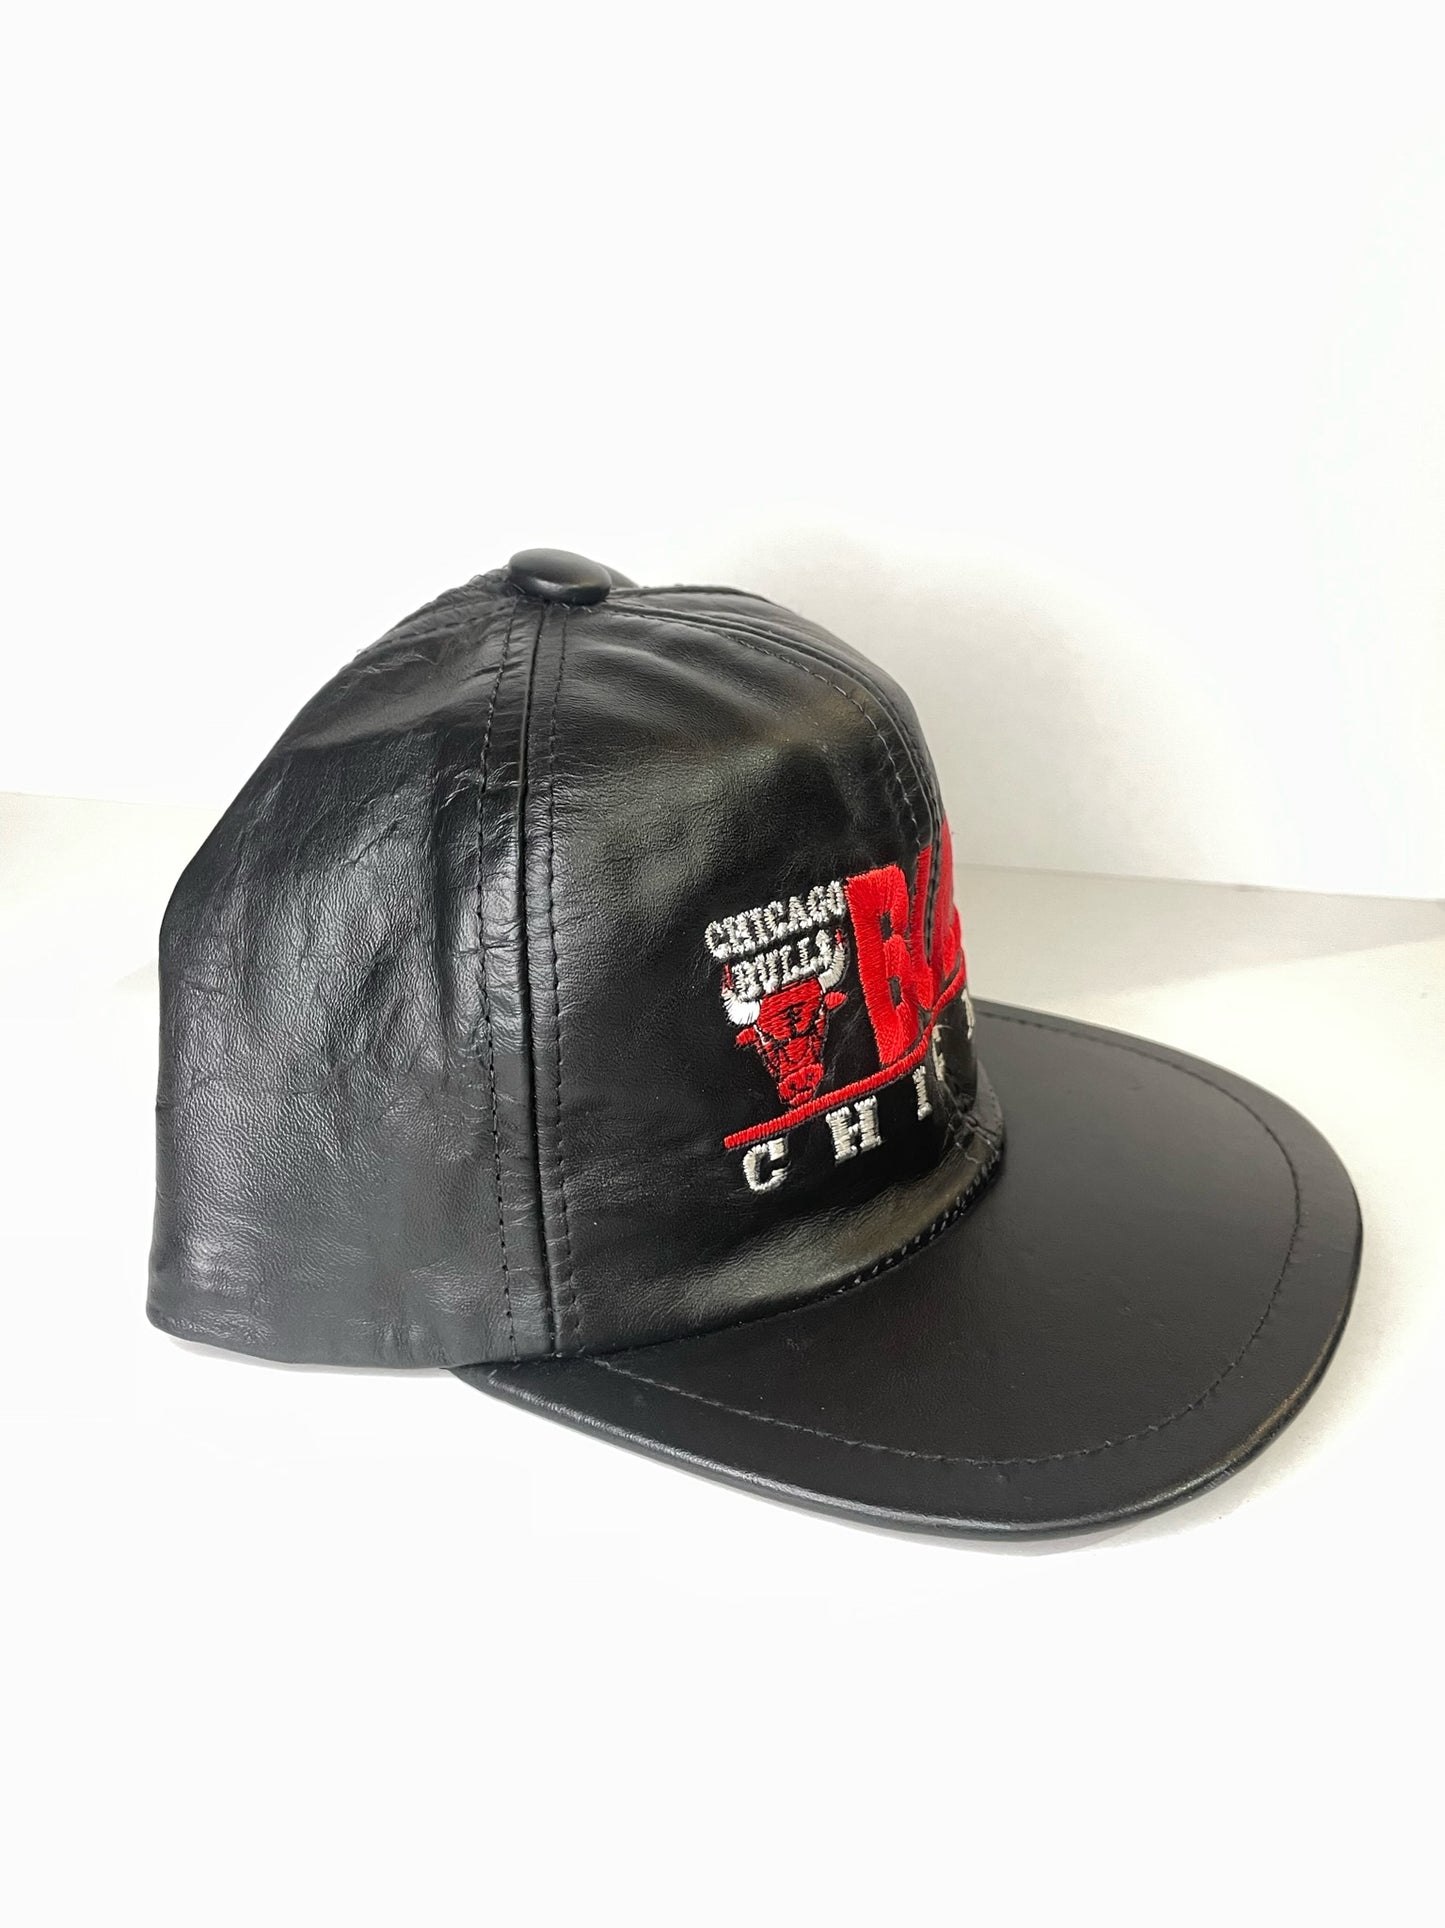 VINTAGE 90s CHICAGO BULLS GENUINE LEATHER "MADE IN USA" SNAPBACK CAP HAT